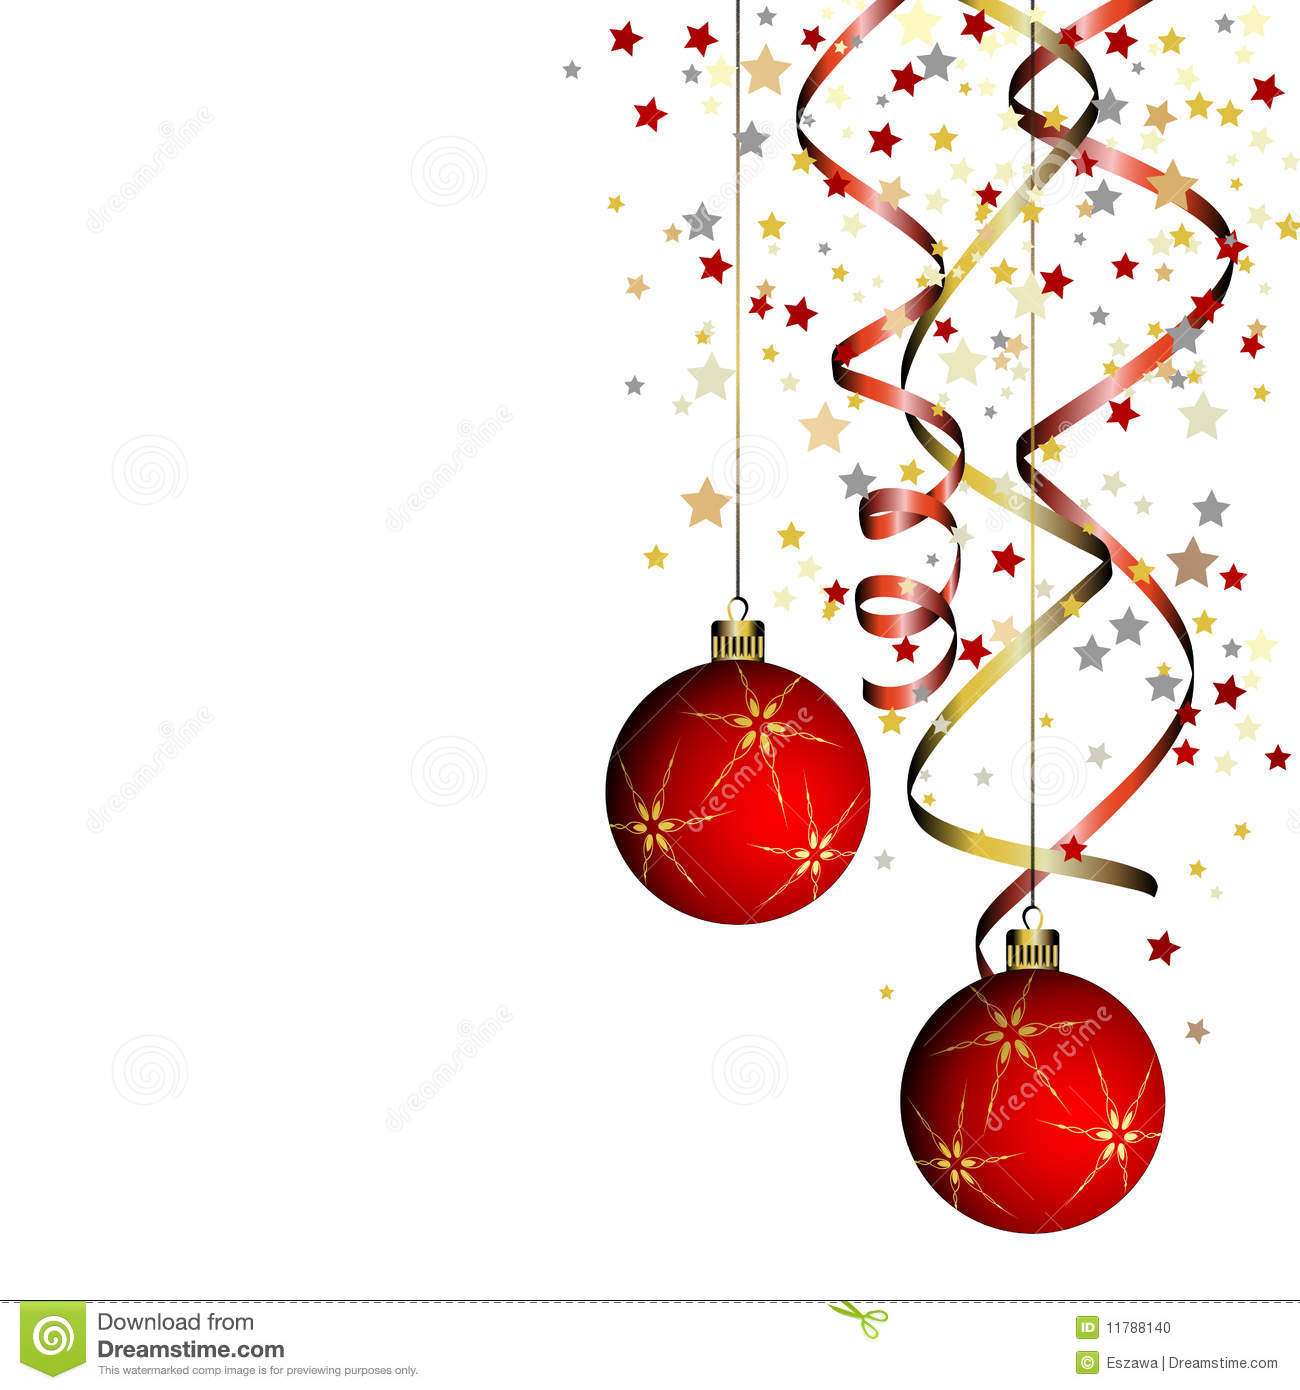 Christmas Ball With Curly Ribbon Stock Photo   Image  11788140